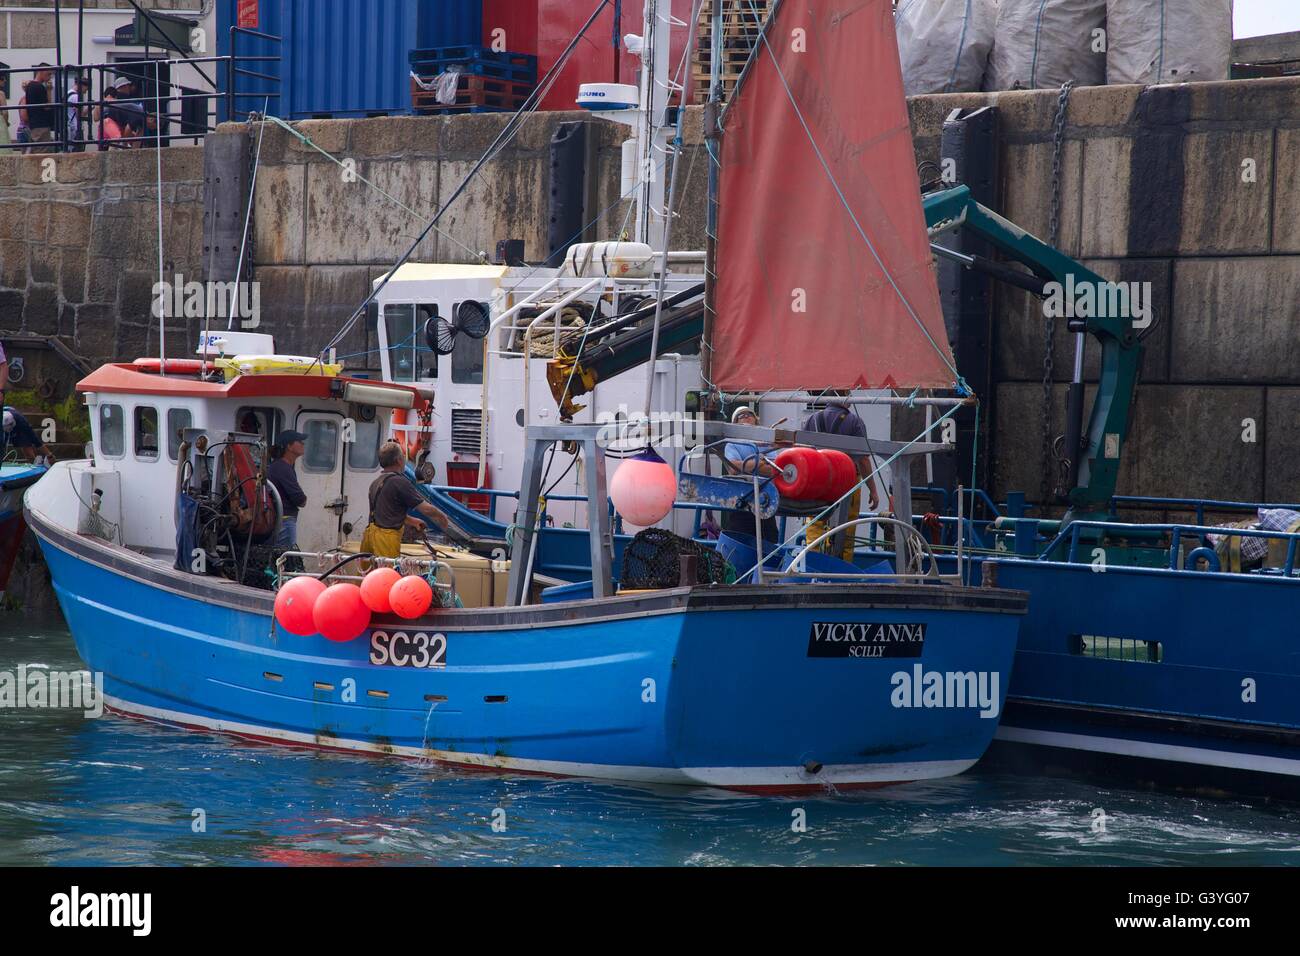 Fishing boats in harbour, St Mary's, Isles of Scilly, Cornwall, England, UK, GB Stock Photo